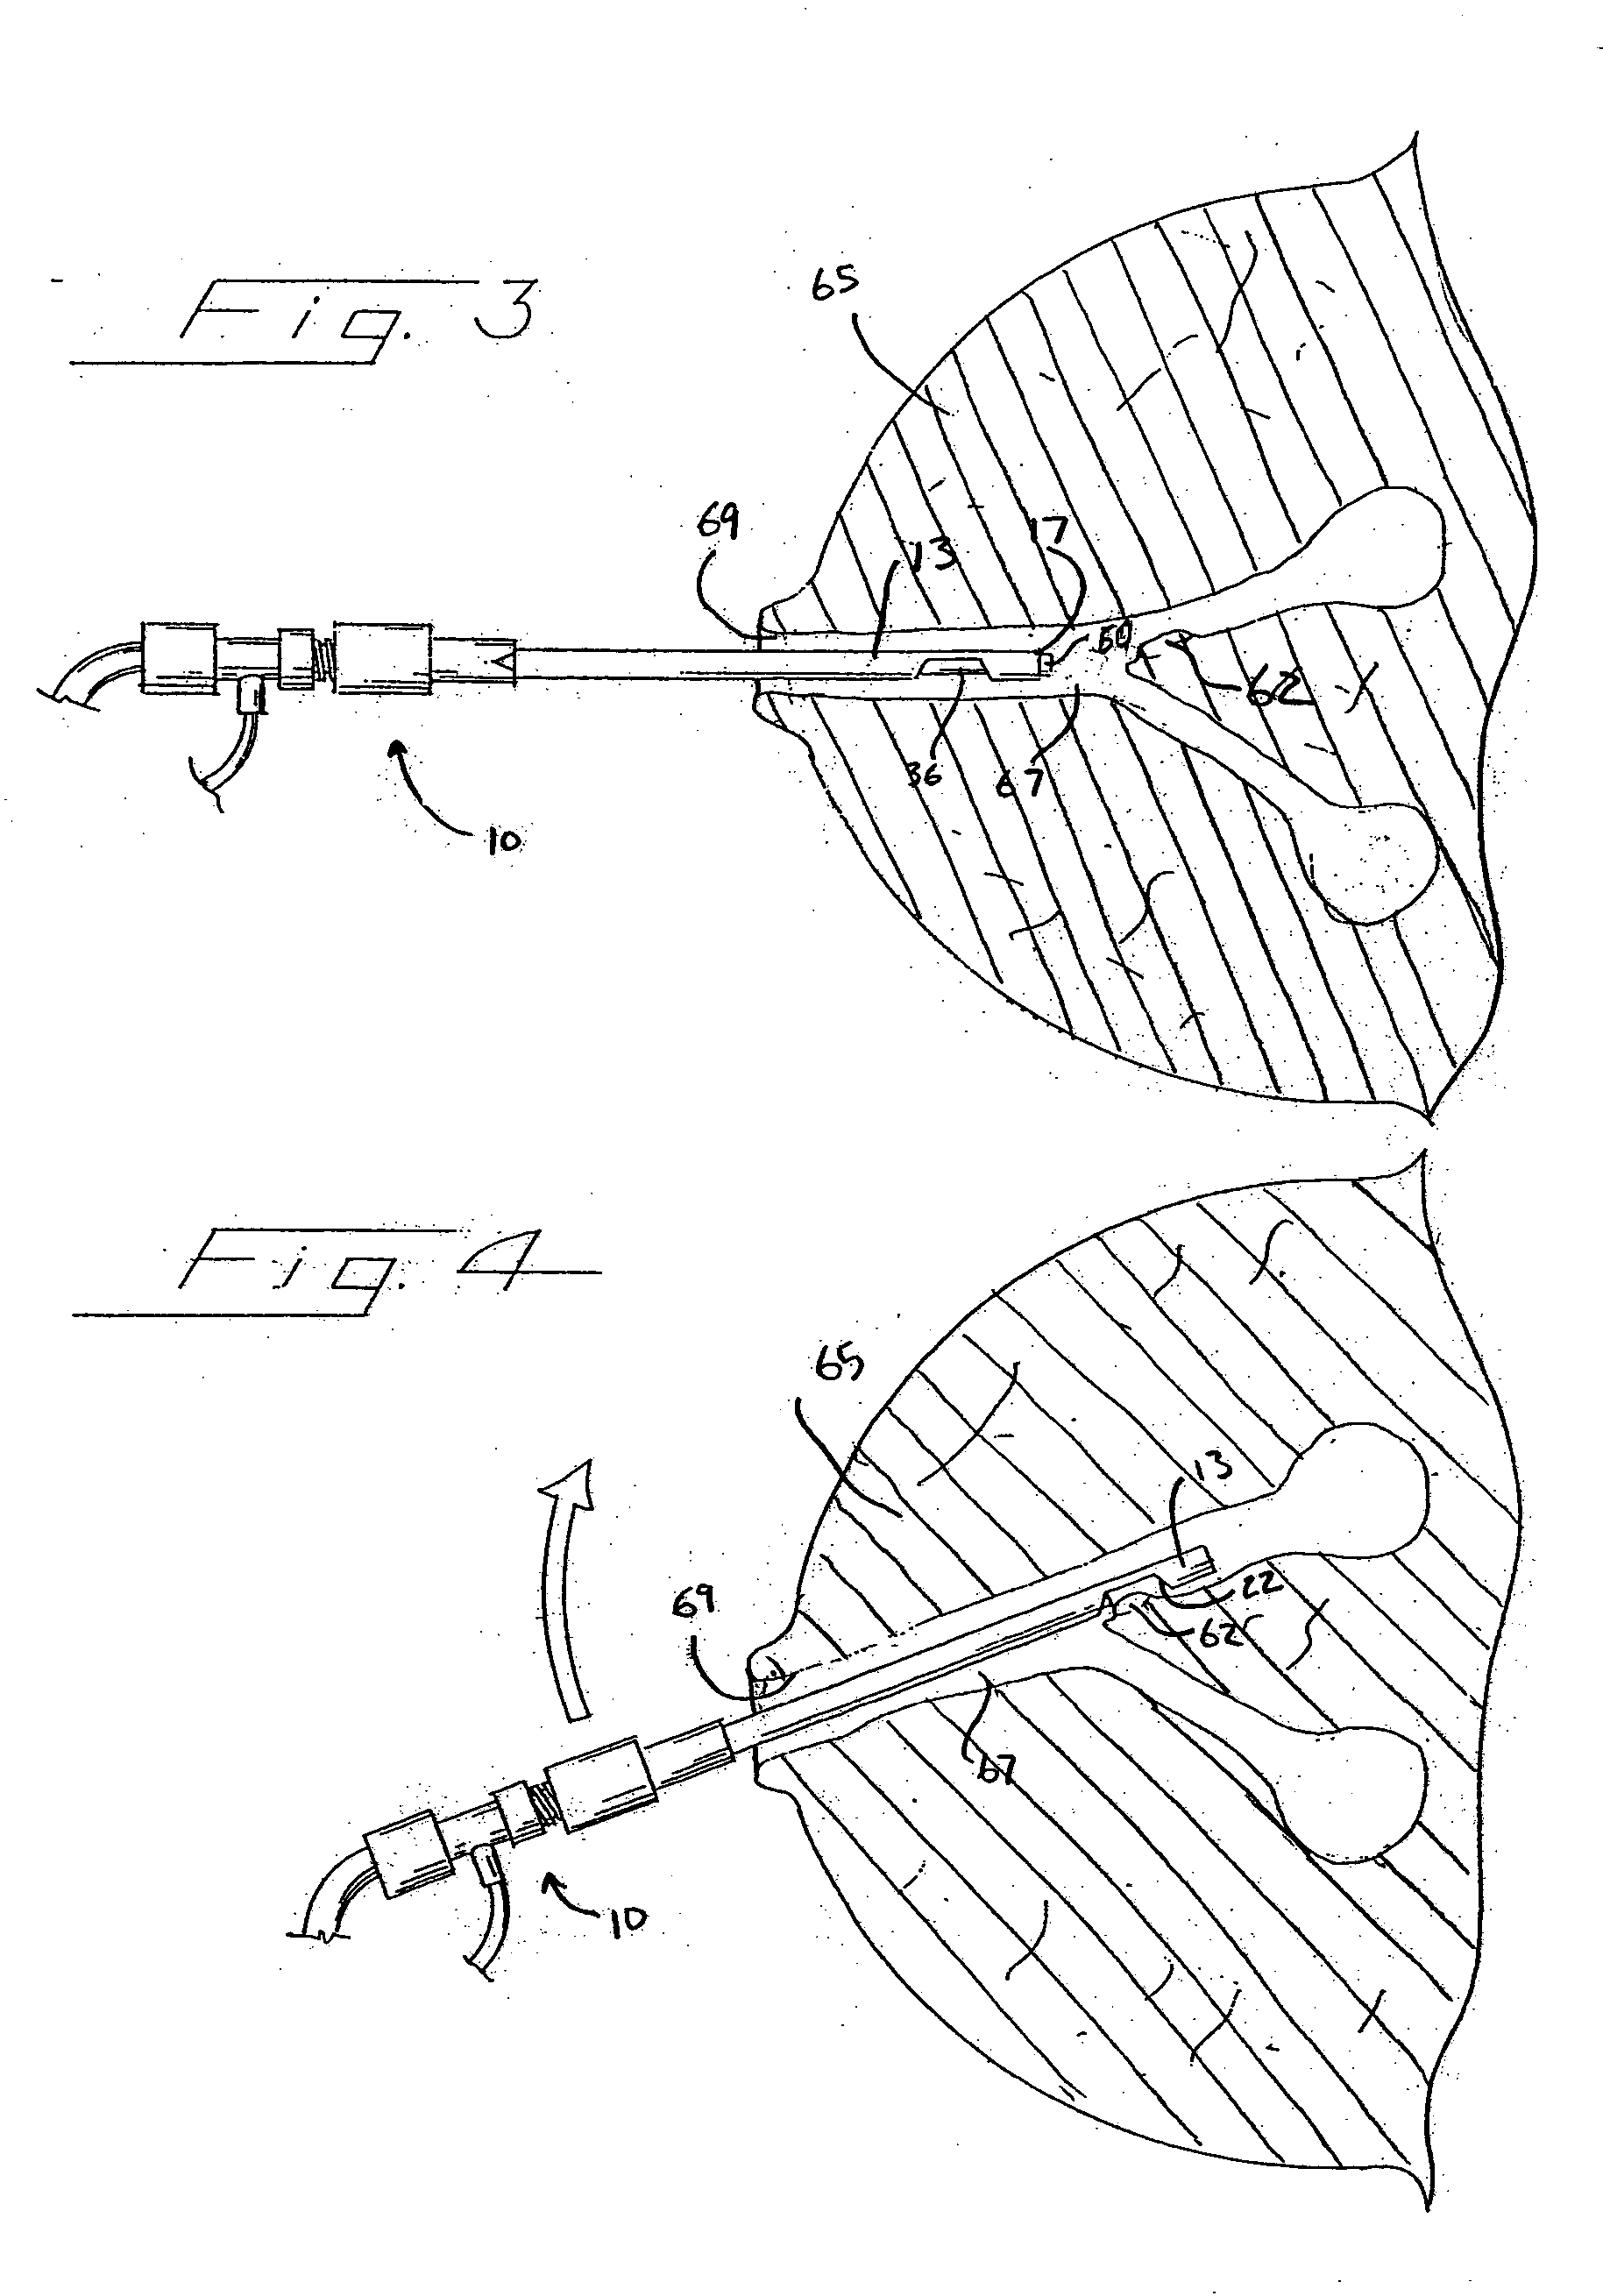 Biopsy device with viewing assembly